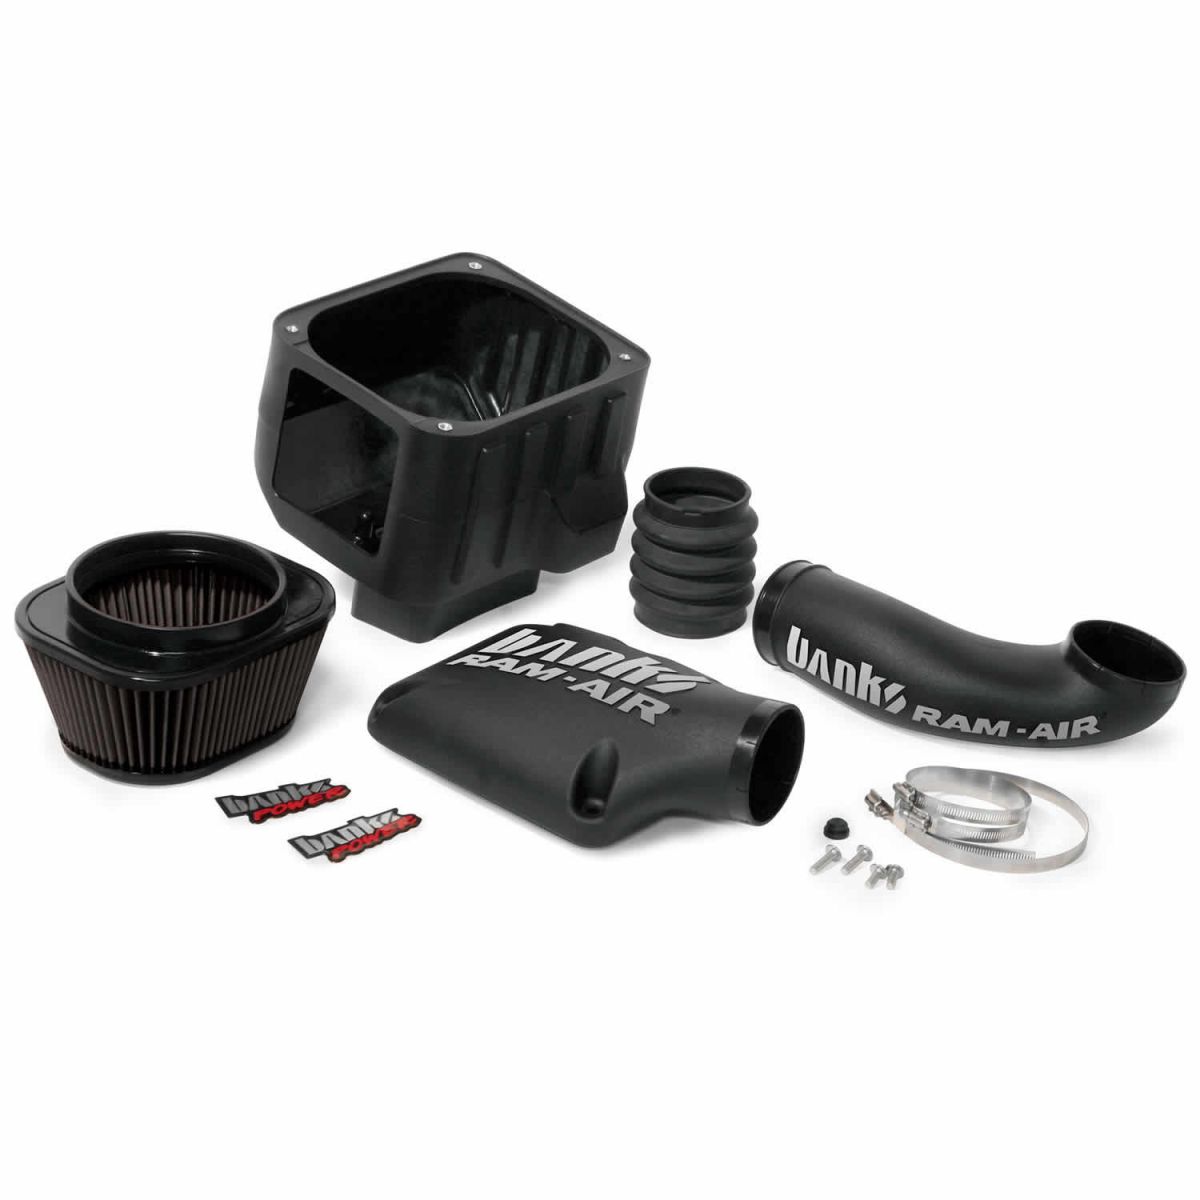 Banks Power - Banks Power Ram-Air Cold-Air Intake System Dry Filter For 99-08 Chevy/GMC 4.8L-6.0L 1500 & SUV